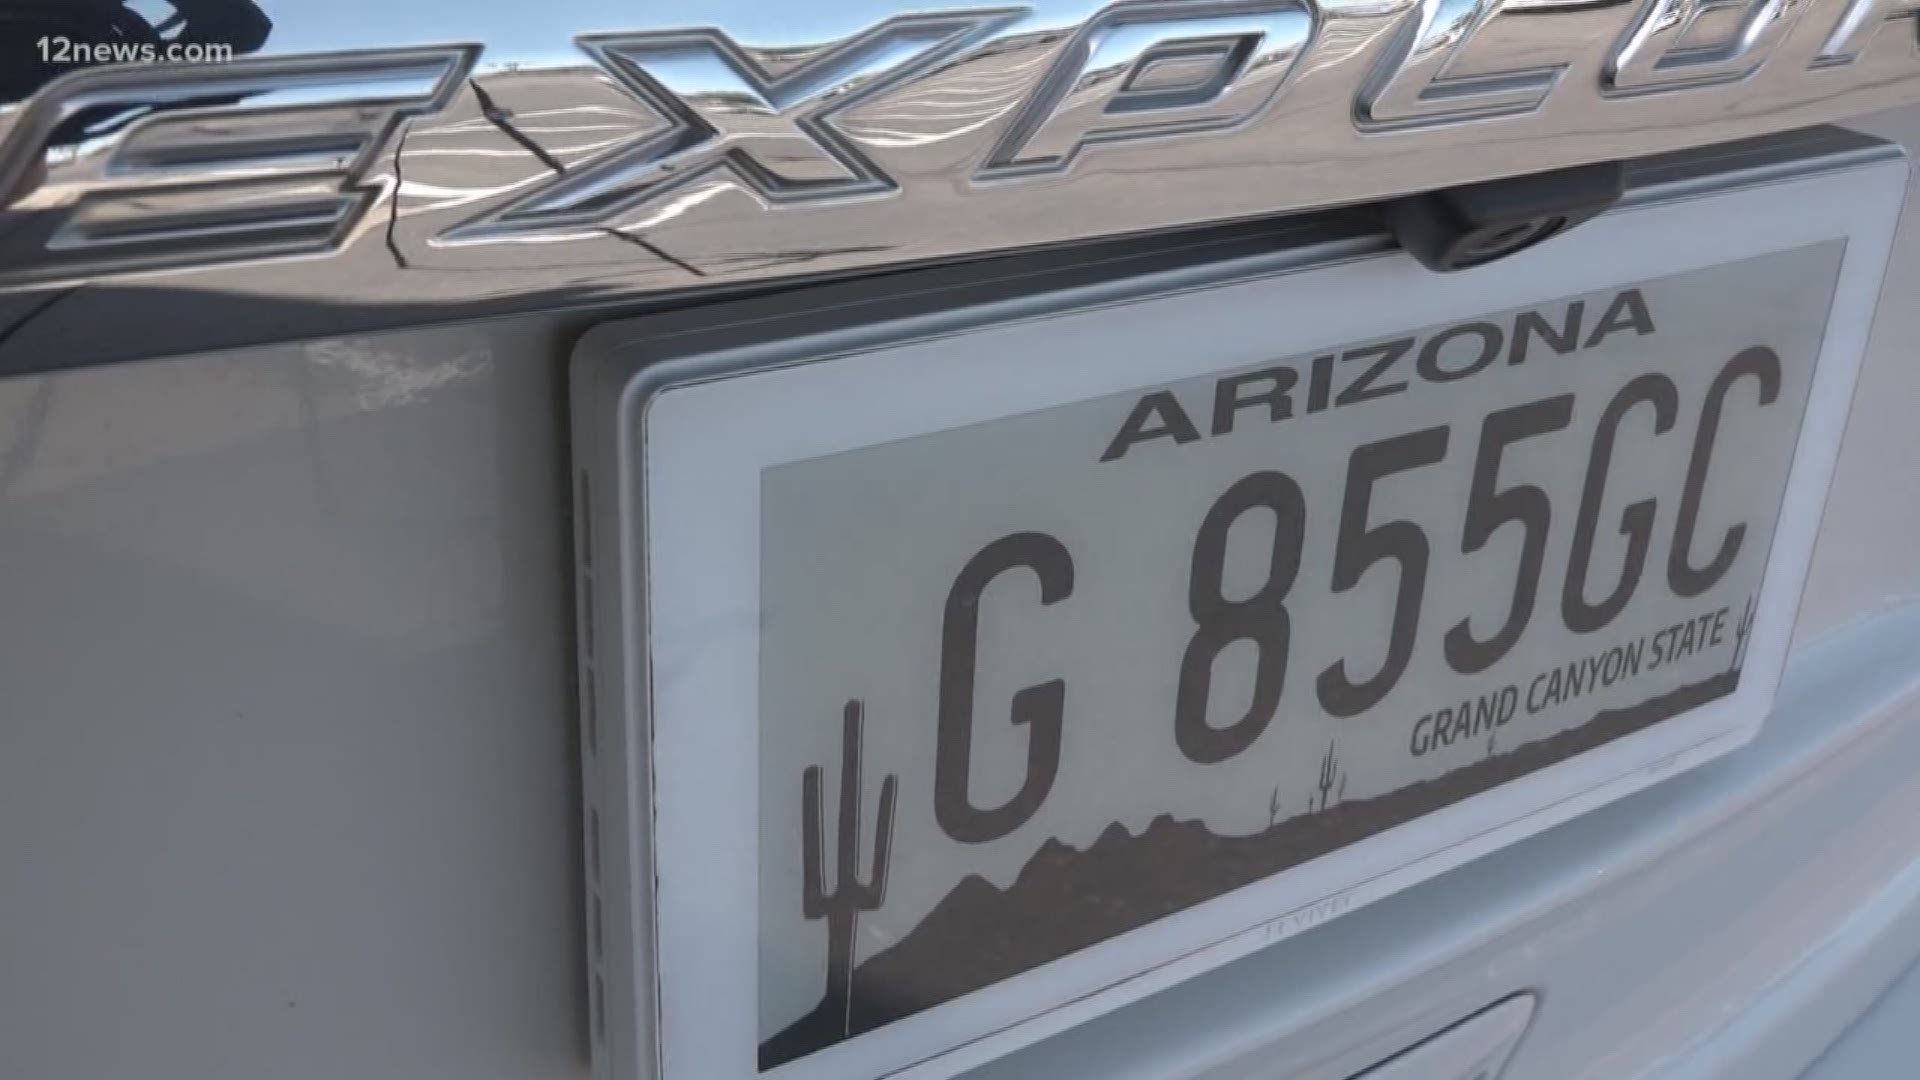 The company Reviver Auto has created digital license plates, and the Arizona Department of Transportation is testing them out on 12 of its vehicles.